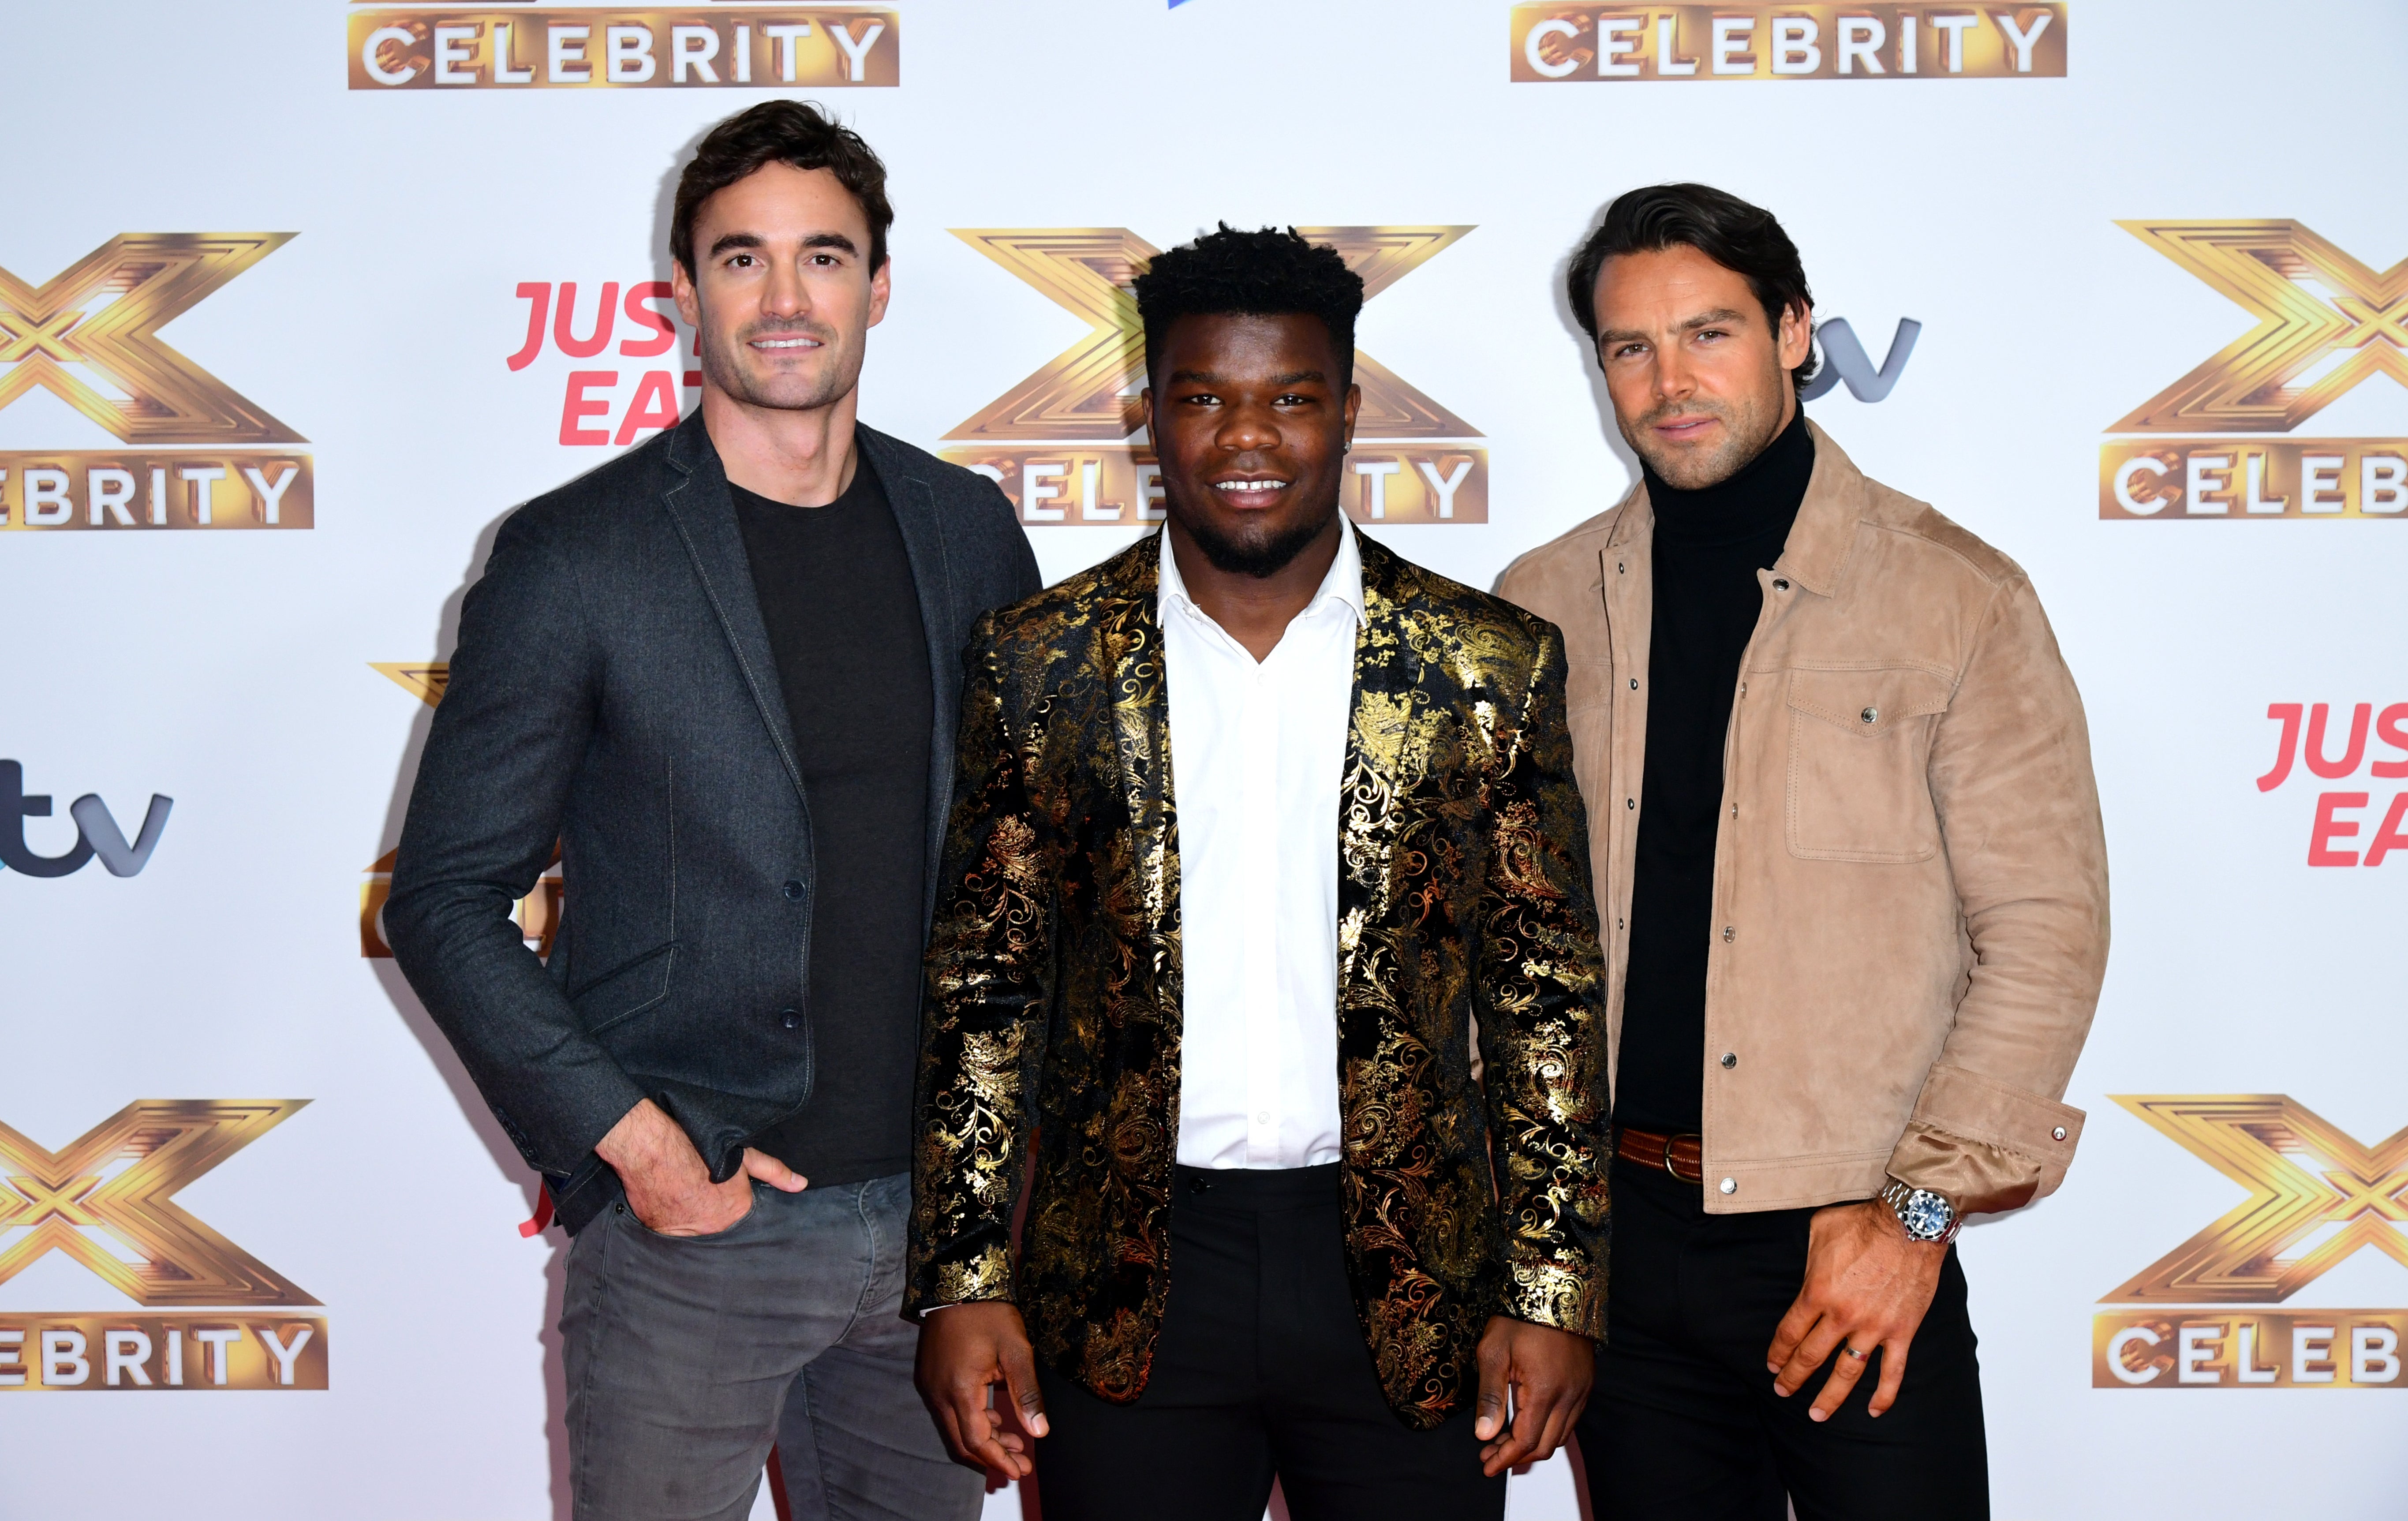 Mr Davis (centre) signed a record deal after appearing on Celebrity X Factor in 2019